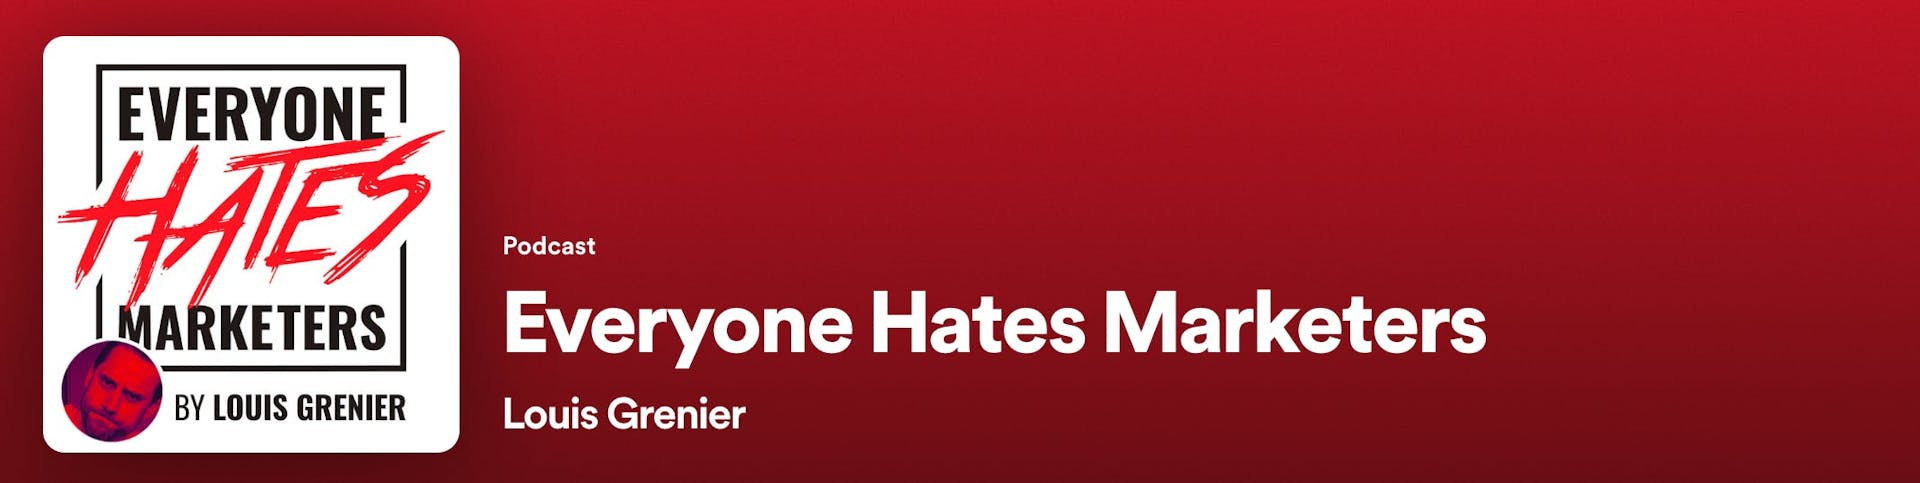 Podcast Everyone Hates Marketers